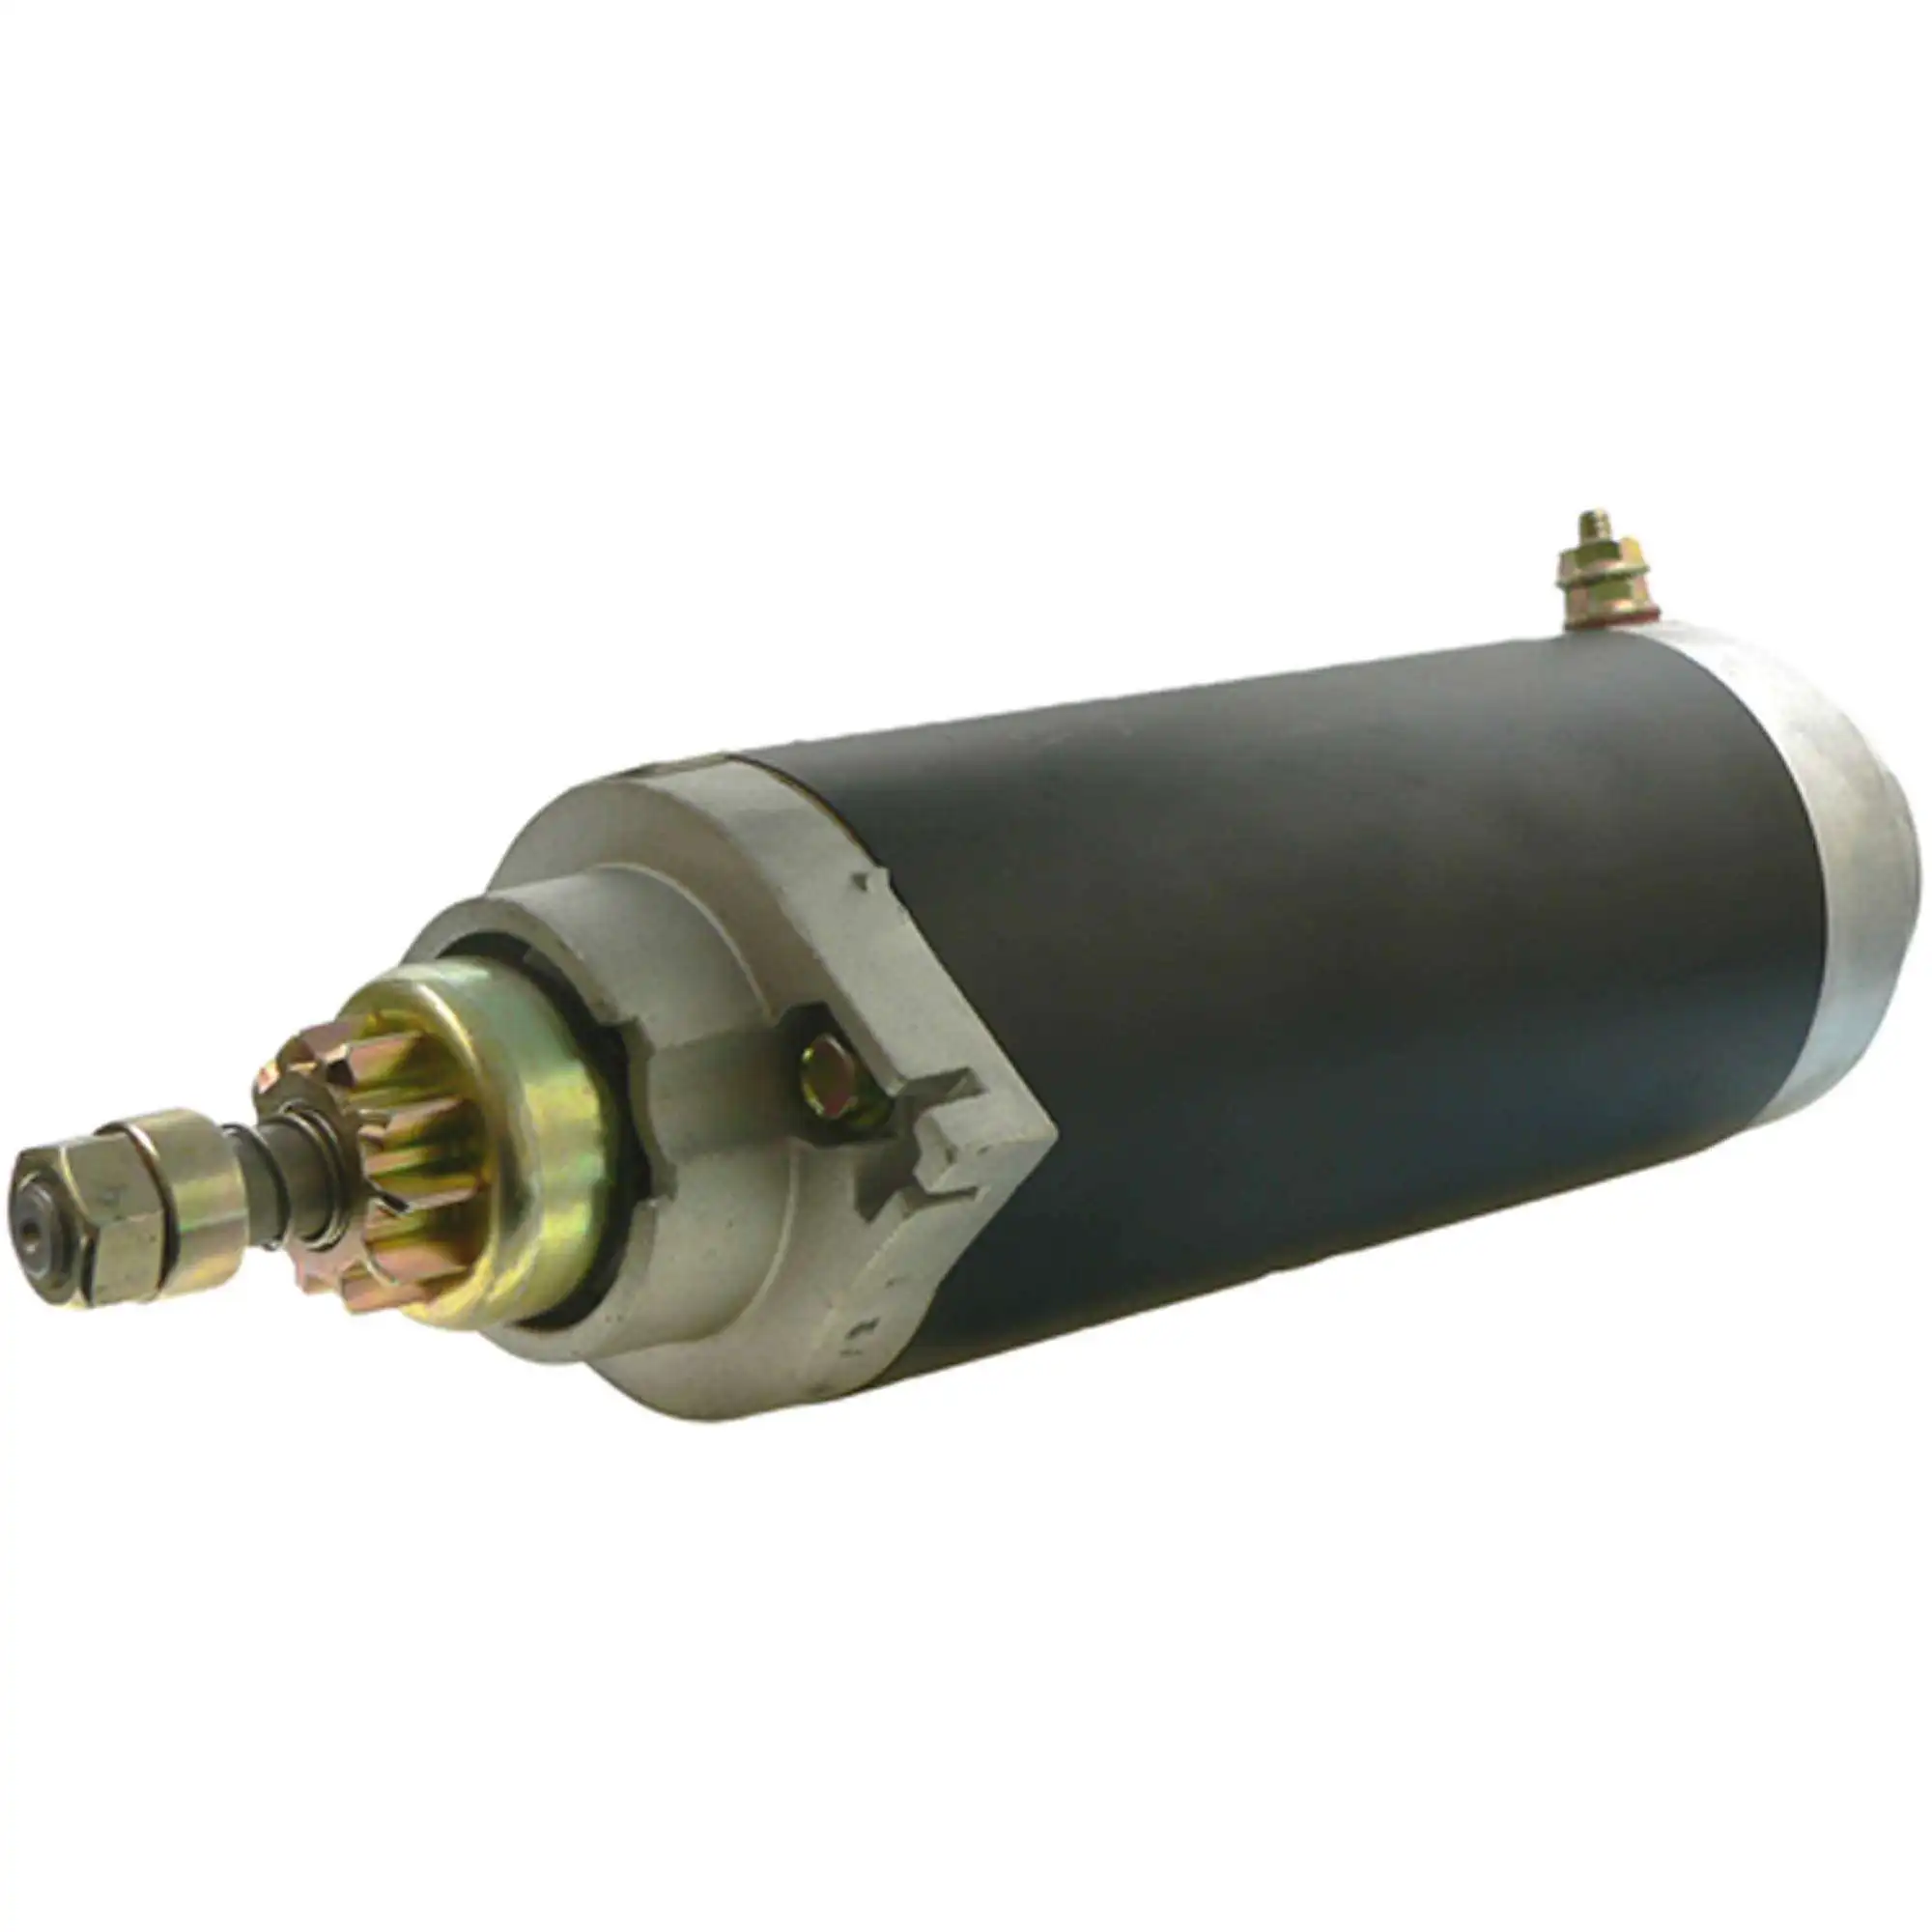 

5057465 5057465A1 5057867 5072467 5392 5735 Starter For Mercury Mariner Outboard Marine 65- 175 Hp 5377 1065221-M030SM